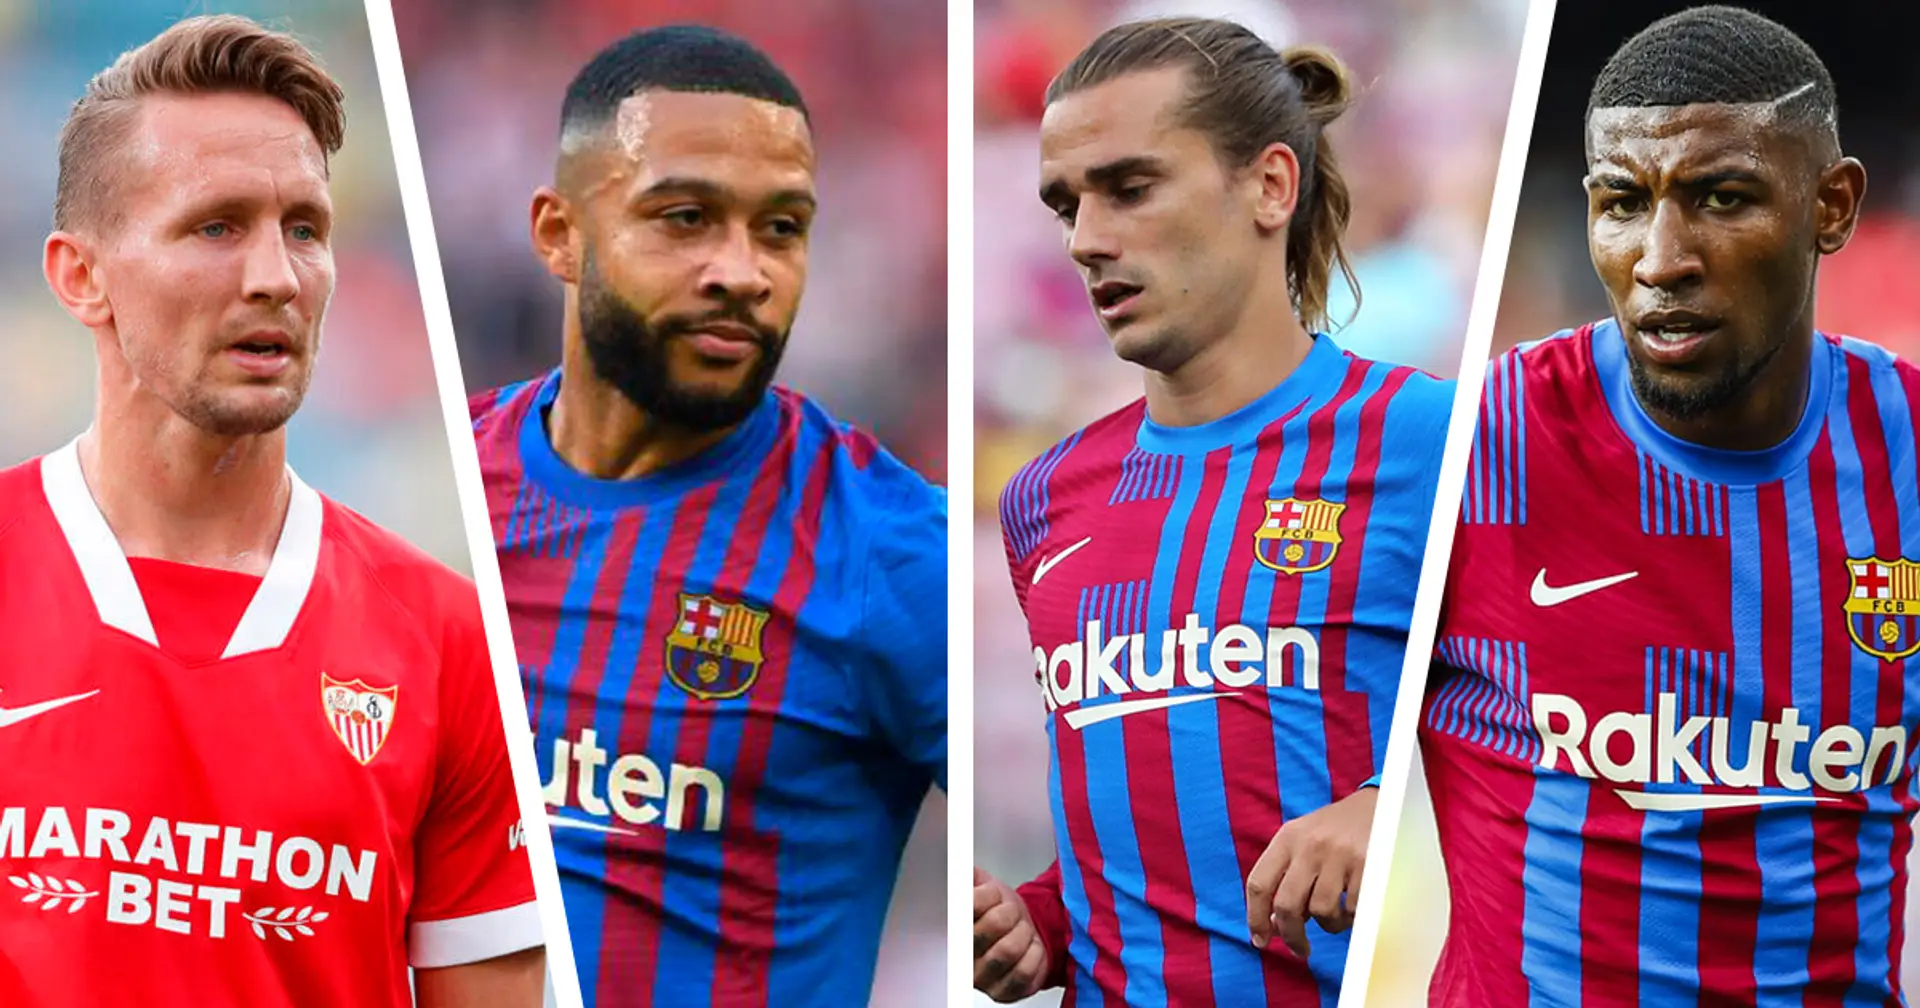 How would you rate Barca's summer transfer campaign from 1 to 10? Why?